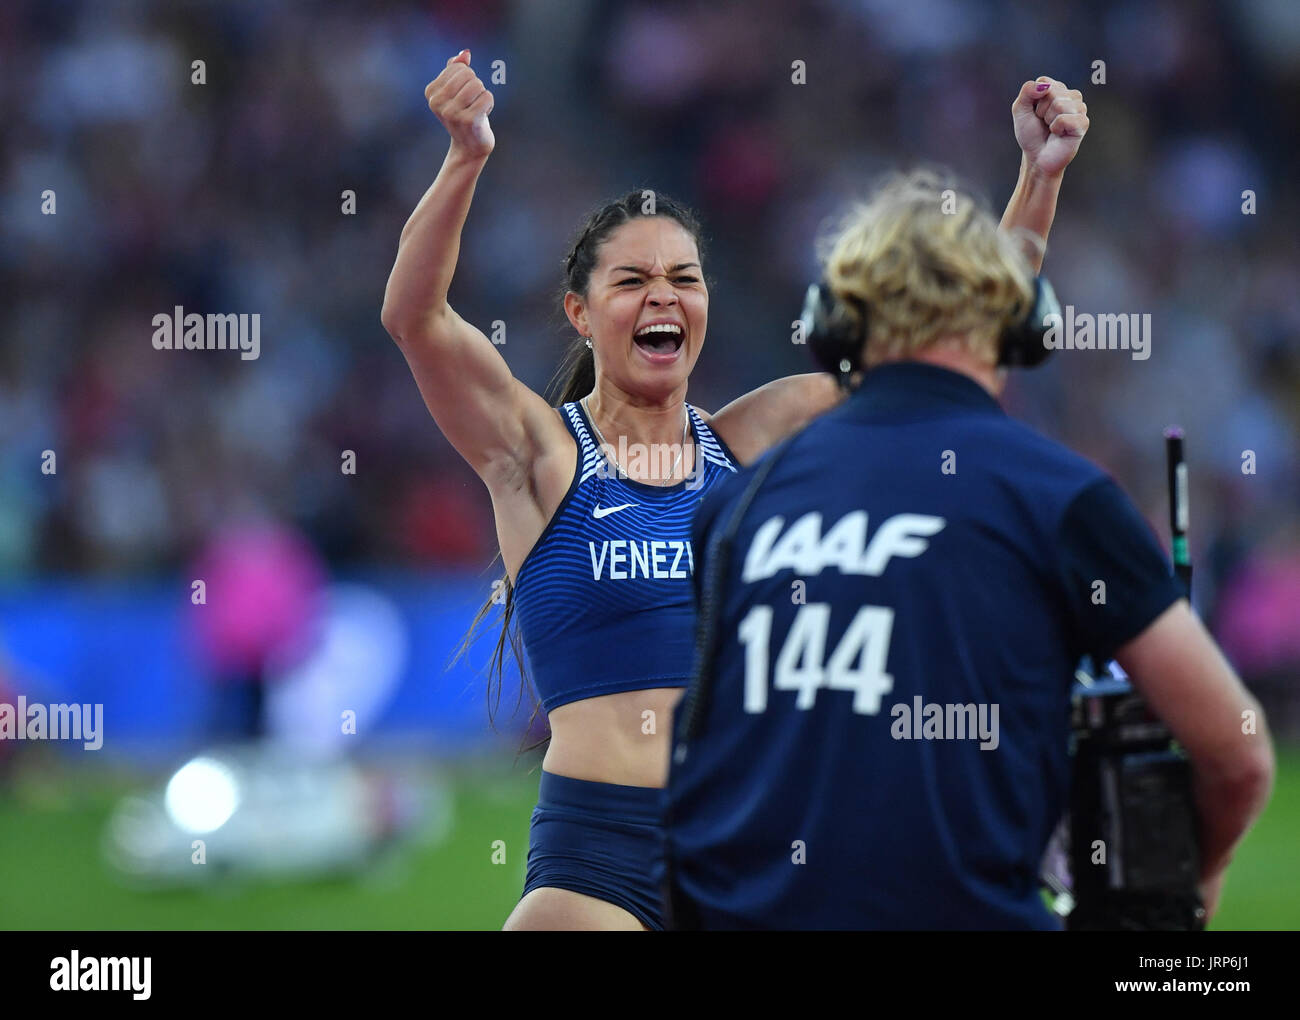 London, UK. 6th Aug, 2017. Robeilys Peinado of Venezuela in action in the women's pole vault final at the IAAF World Championships in Athletics at the Olympic Stadium in London, UK, 6 August 2017. Photo: Bernd Thissen/dpa/Alamy Live News Stock Photo